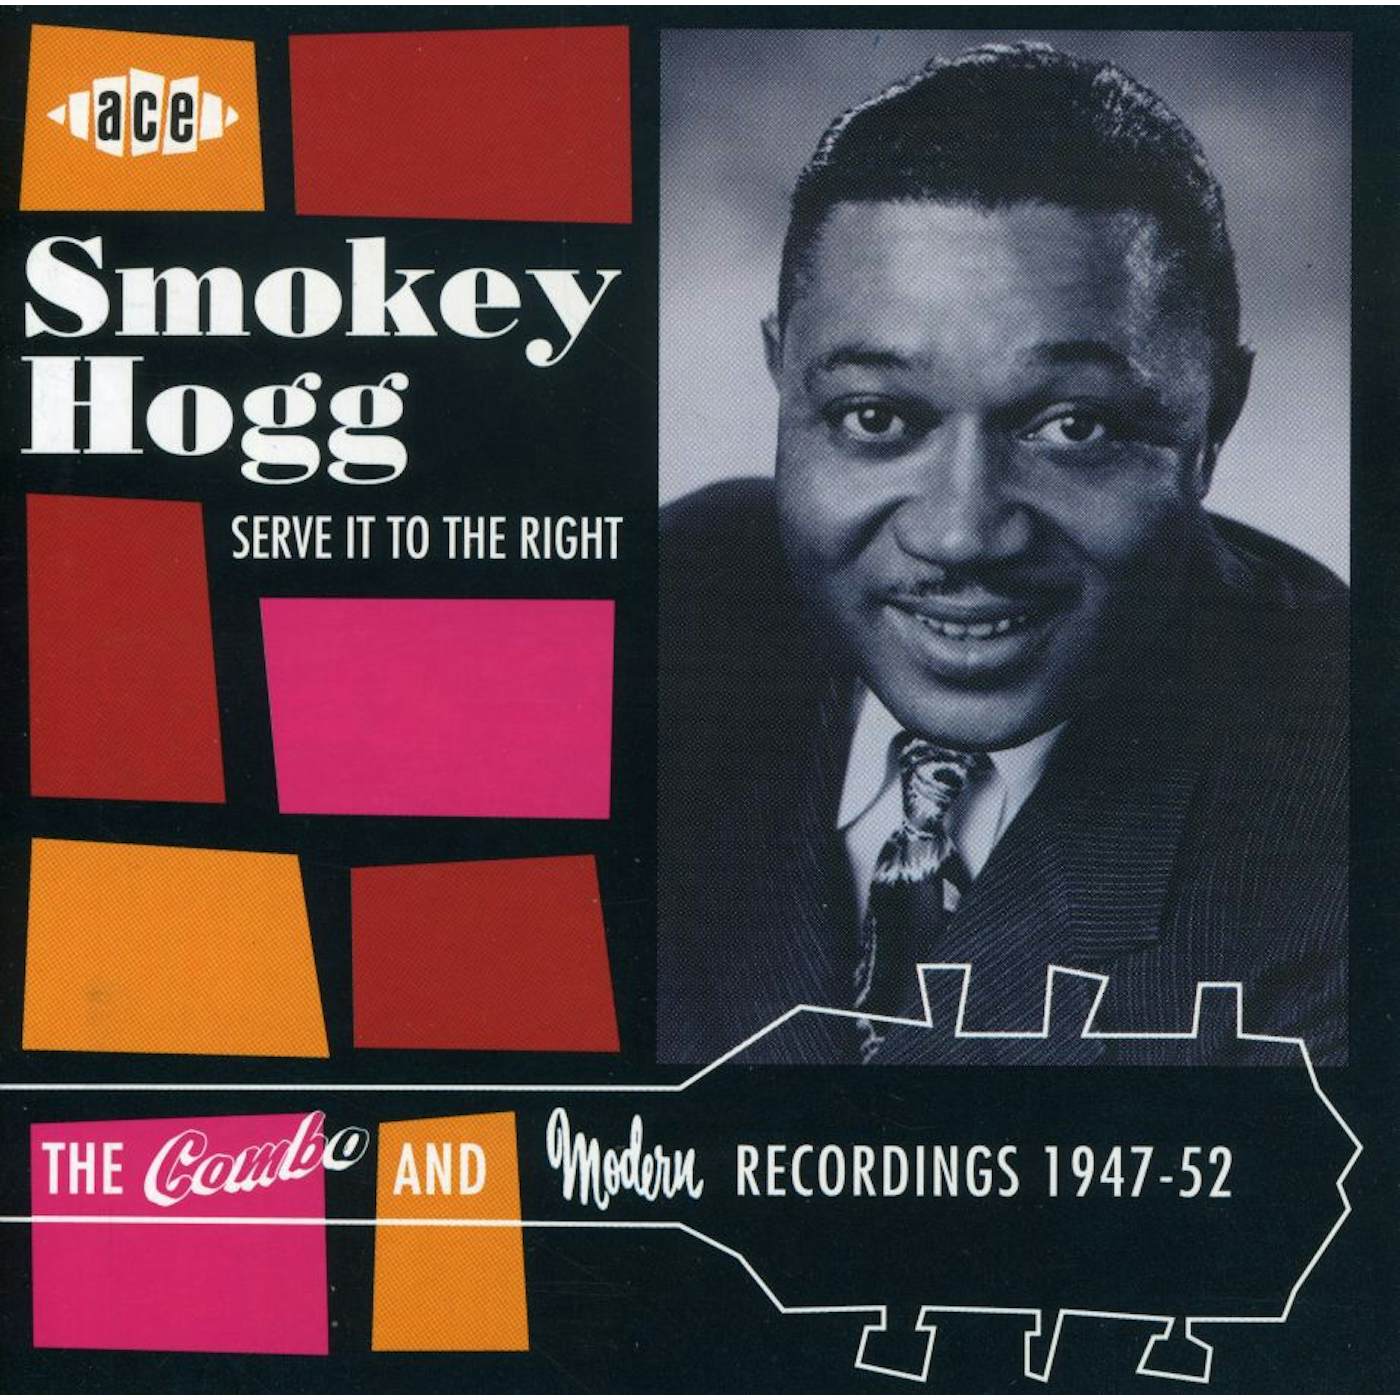 Smokey Hogg SERVE IT TO THE RIGHT: COMBO & MODERN RECORDINGS CD